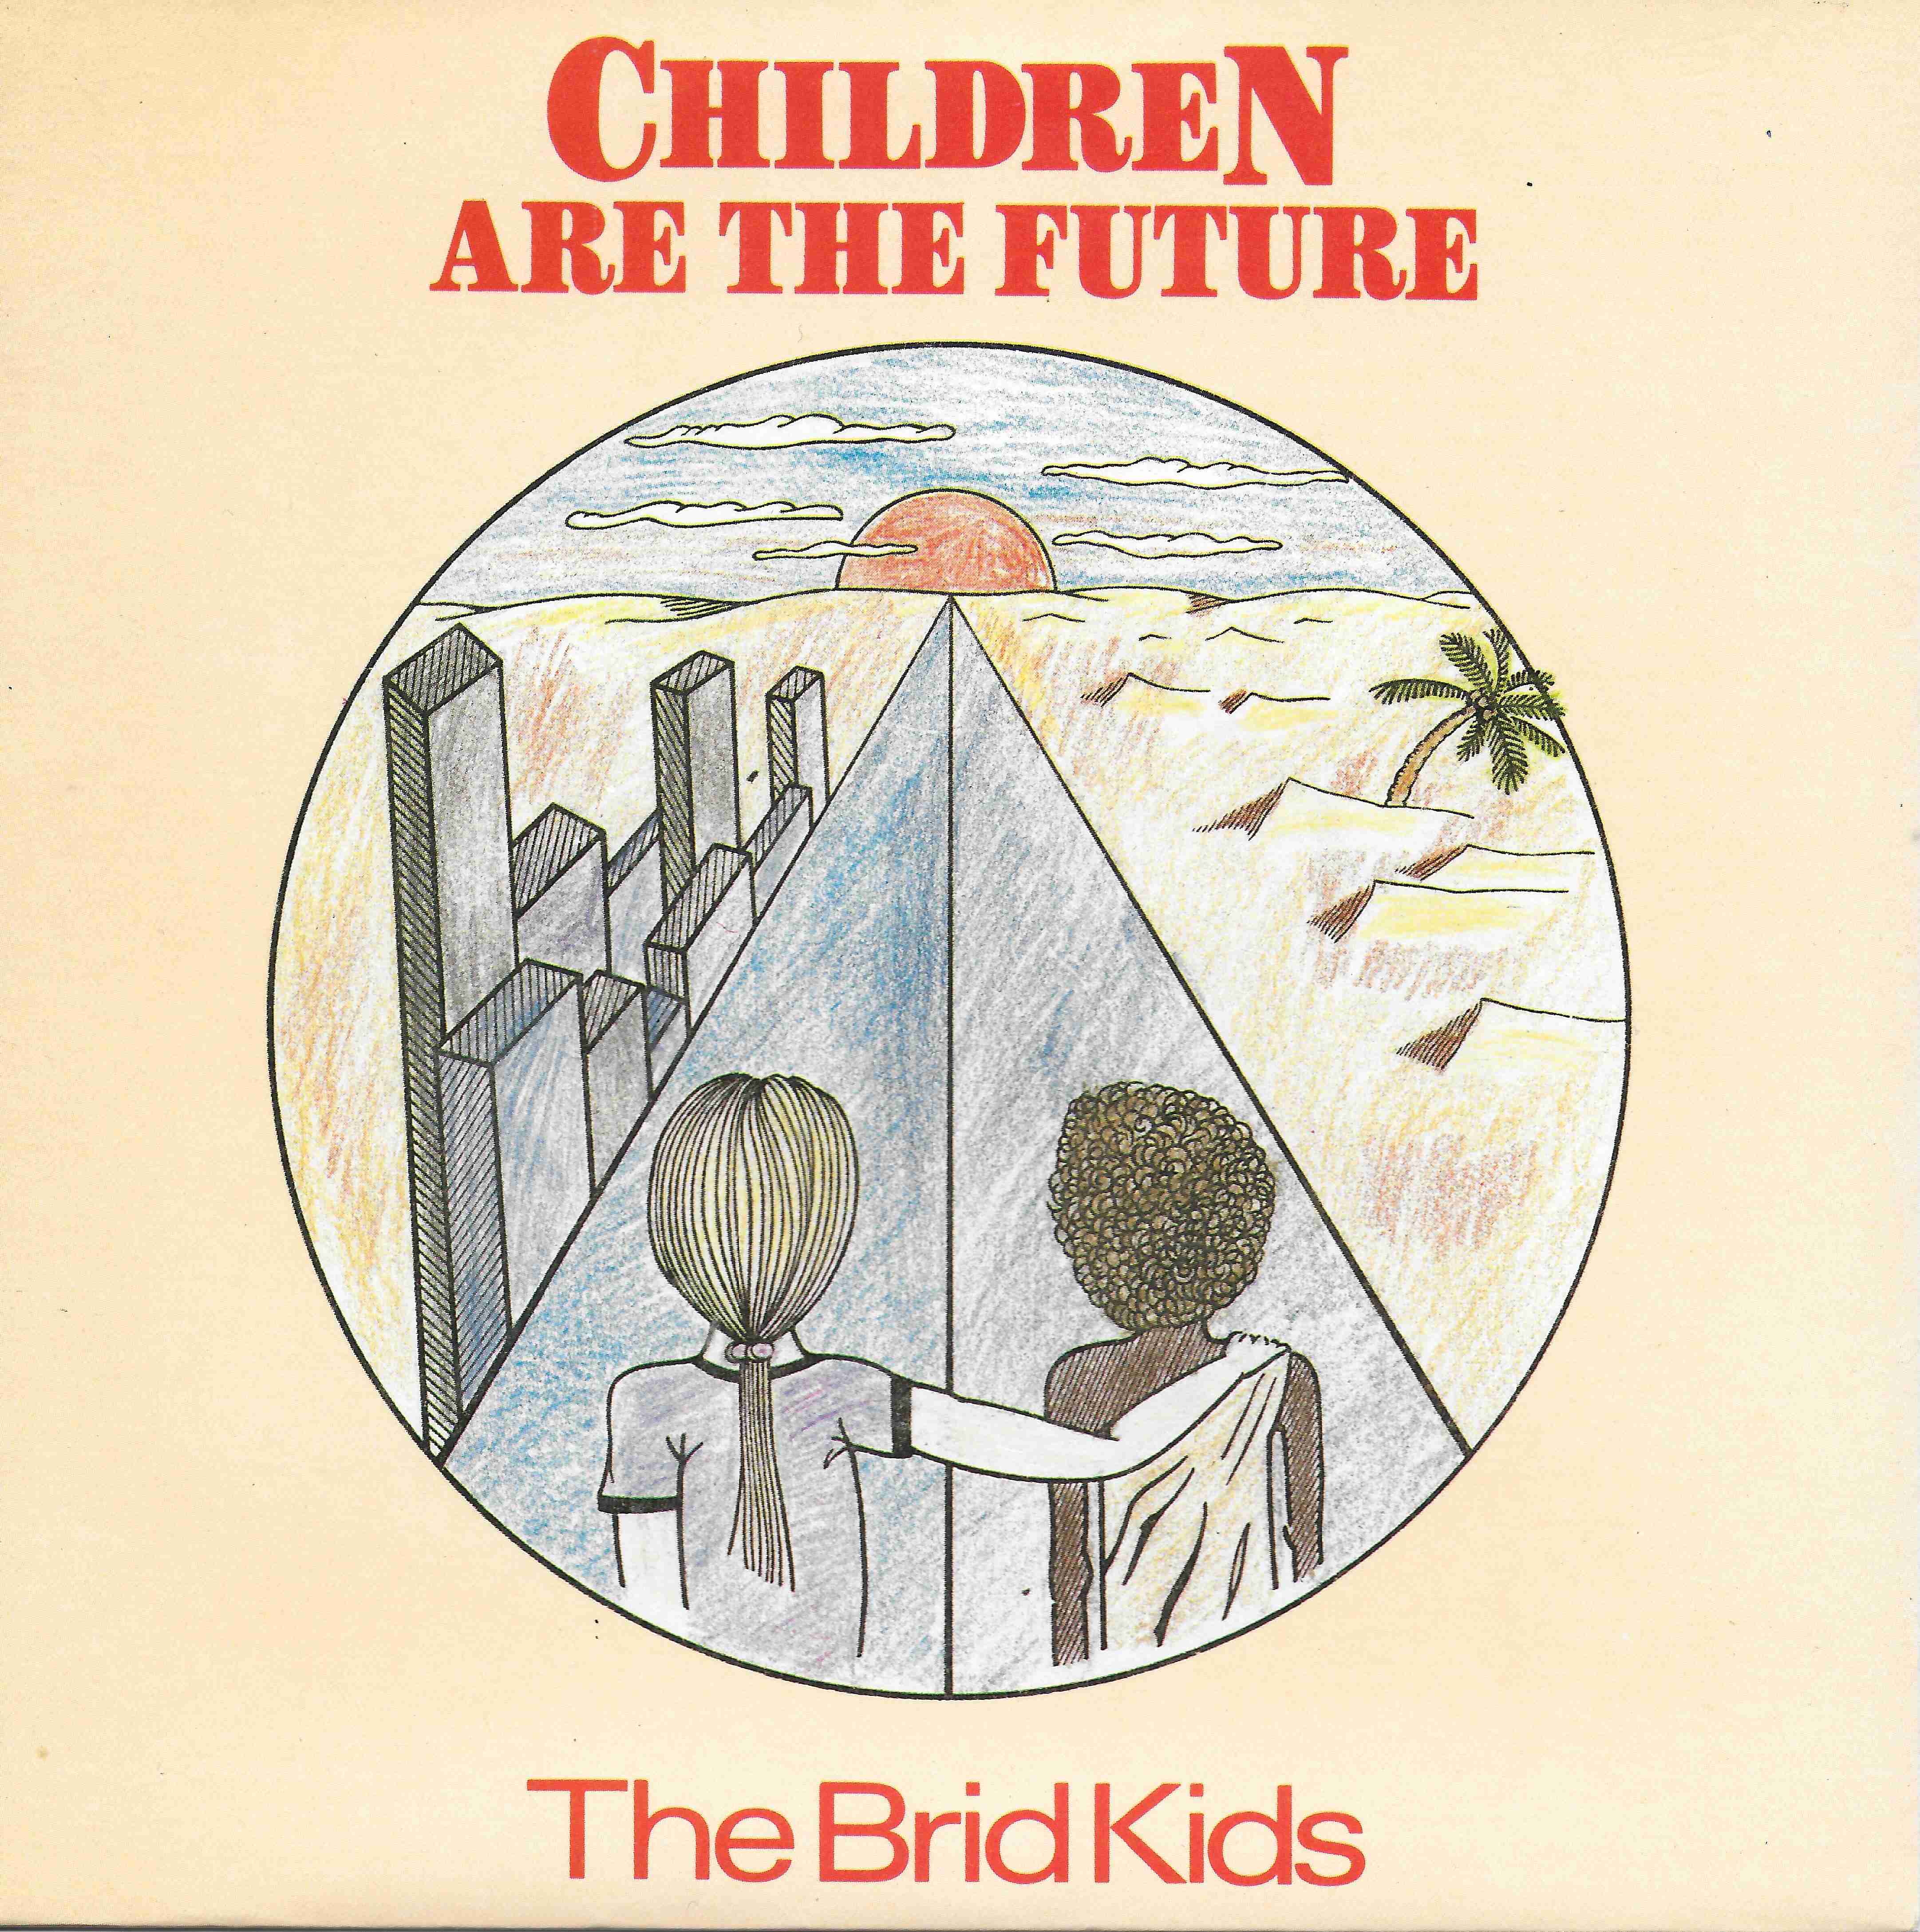 Picture of Children are the future (BBC Children In Need) by artist The Brid Kids from the BBC singles - Records and Tapes library